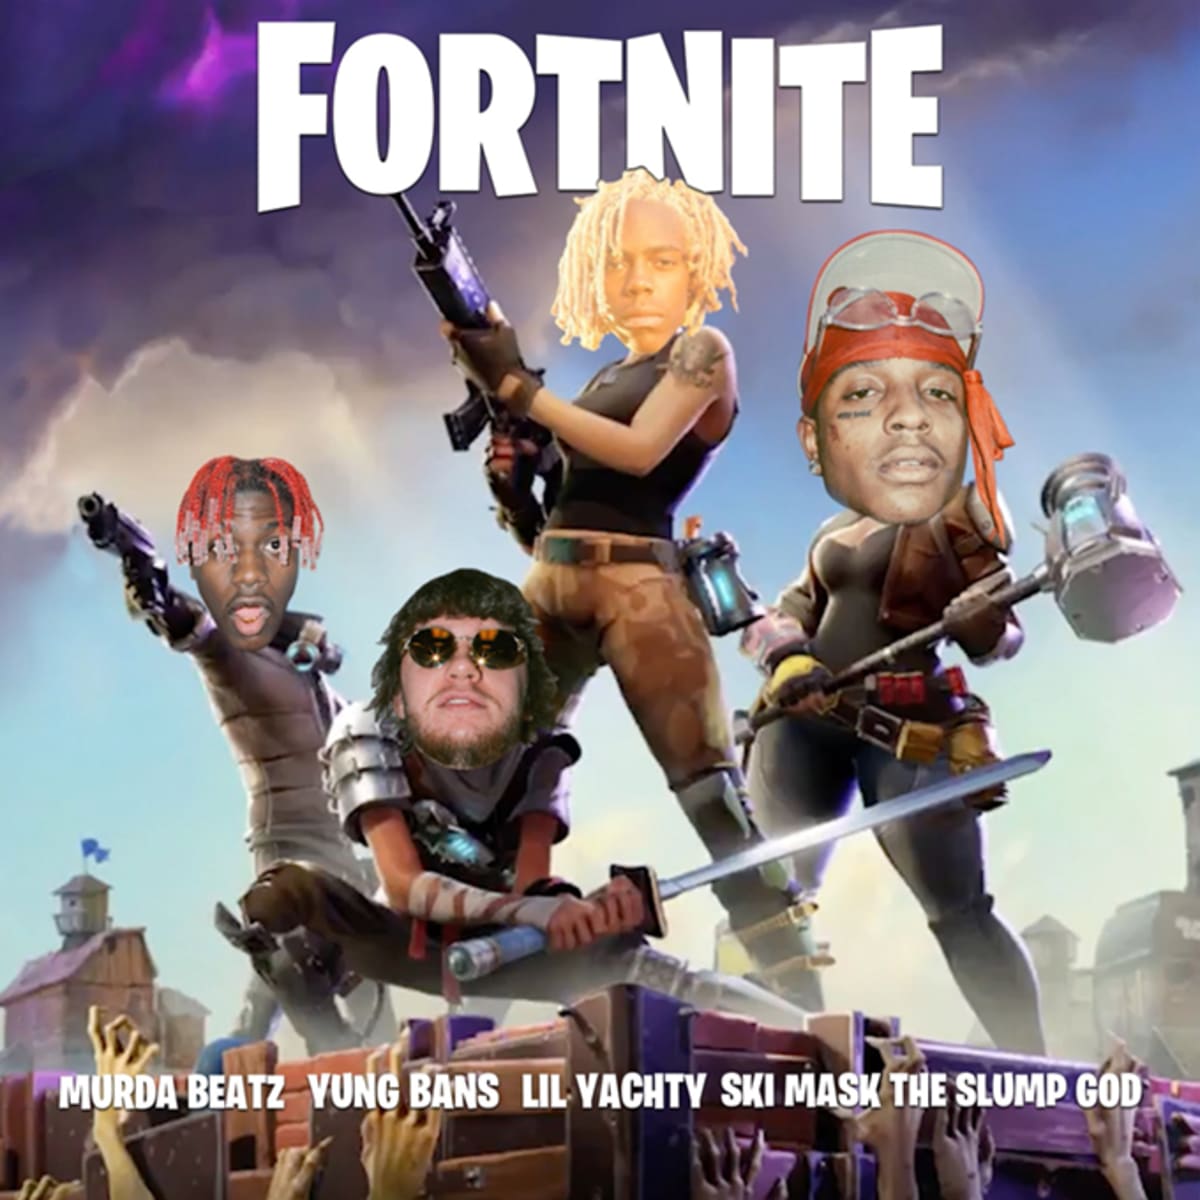 lil yachty ski mask the slump god and yung bans connect on fortnite complex - fortnite song nerd out 2